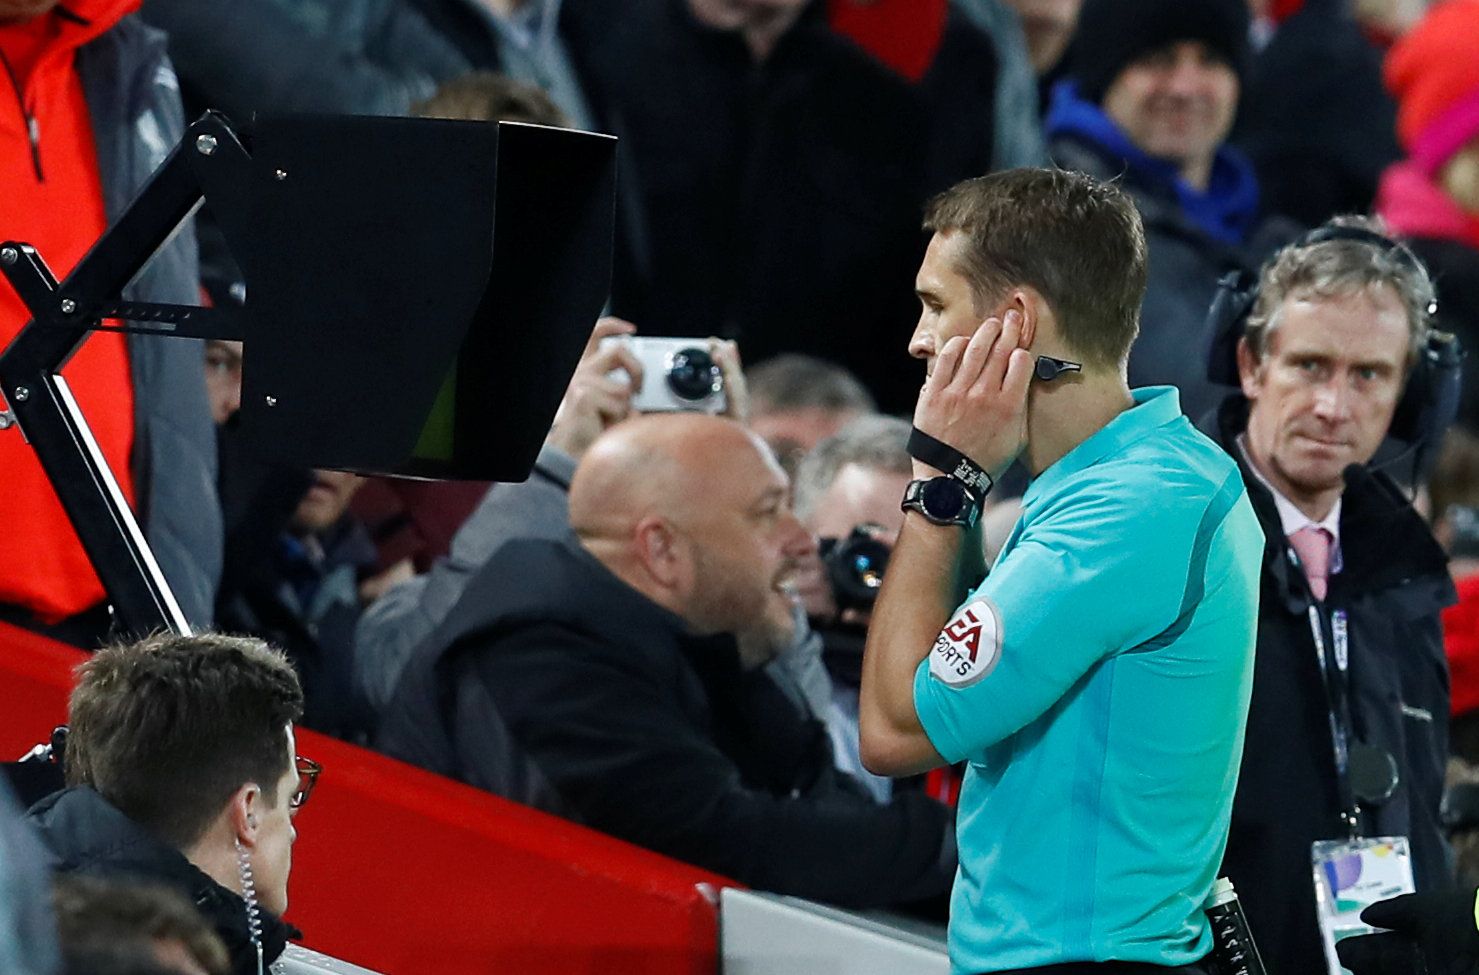 Soccer Football - FA Cup Fourth Round - Liverpool vs West Bromwich Albion - Anfield, Liverpool, Britain - January 27, 2018   Referee Craig Pawson watches a monitor before awarding a penalty to Liverpool upon VAR (Video Assistant Referee) review   Action Images via Reuters/Jason Cairnduff